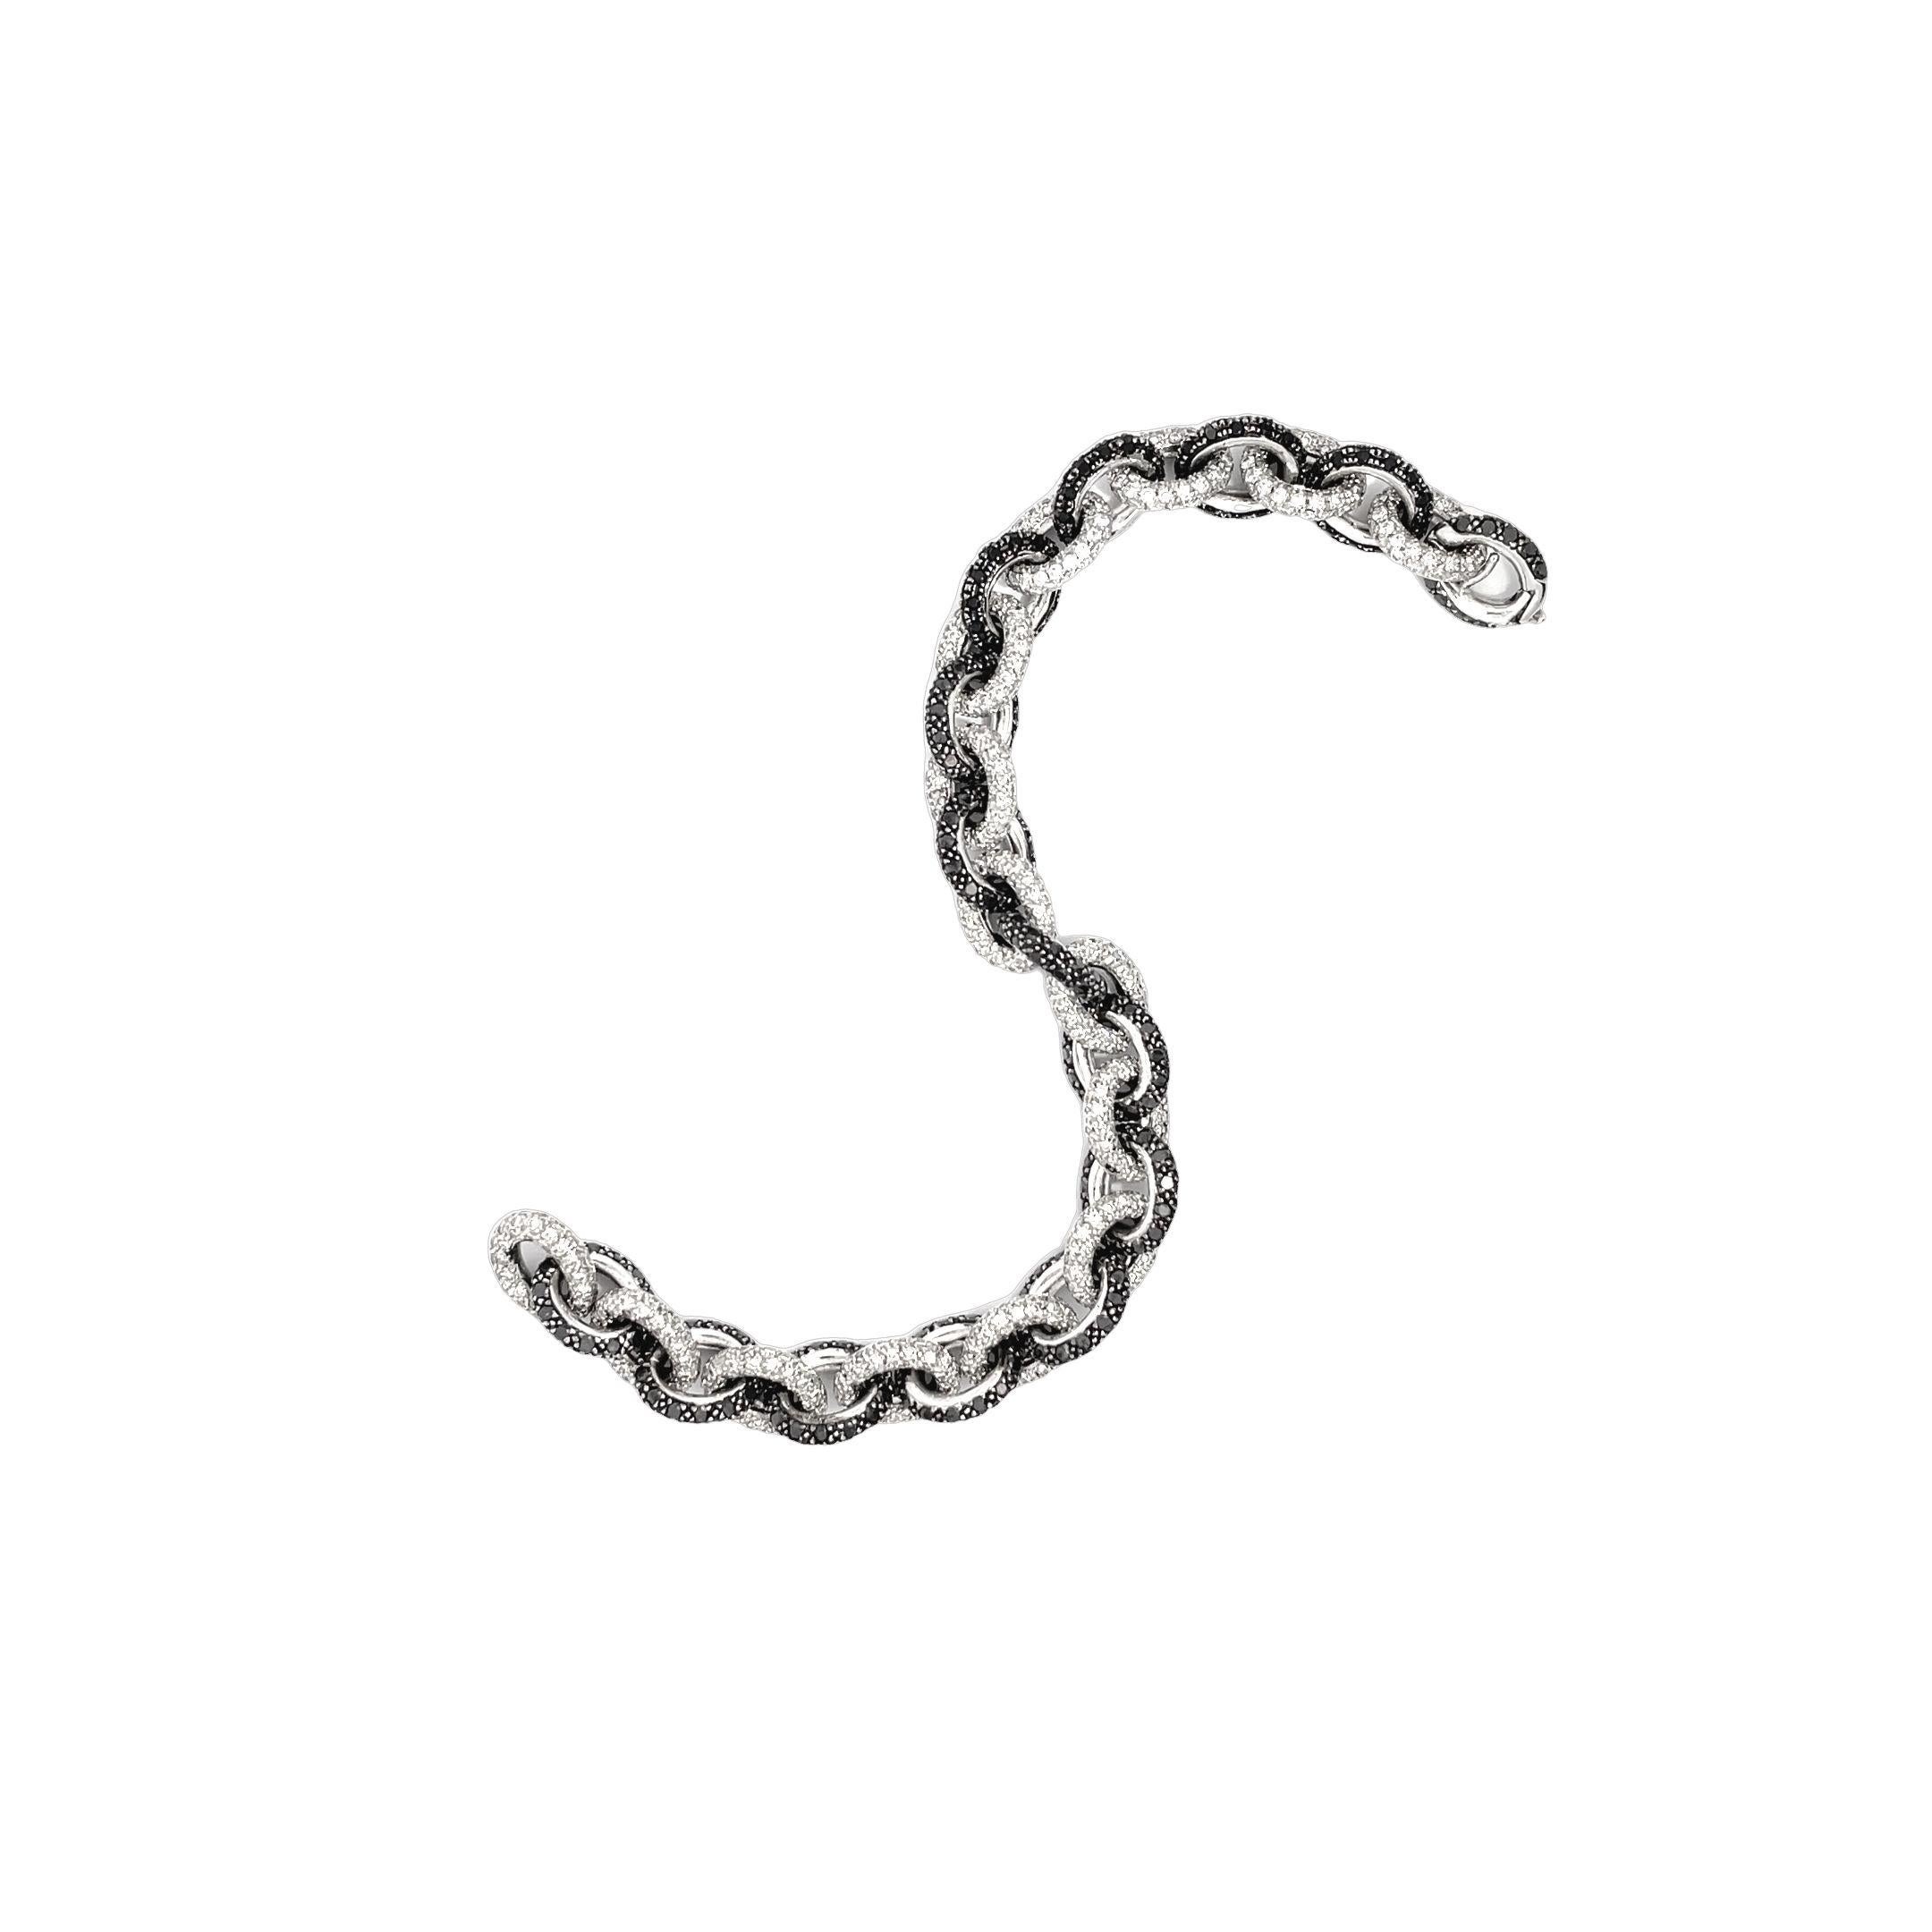 This exquisite diamond bracelet makes a stunning jewelry statement. Crafted from lustrous 18-karat white gold, it features a continuous chain of interconnecting links that form a seamless and sophisticated band. Wrapping around the wrist, each link